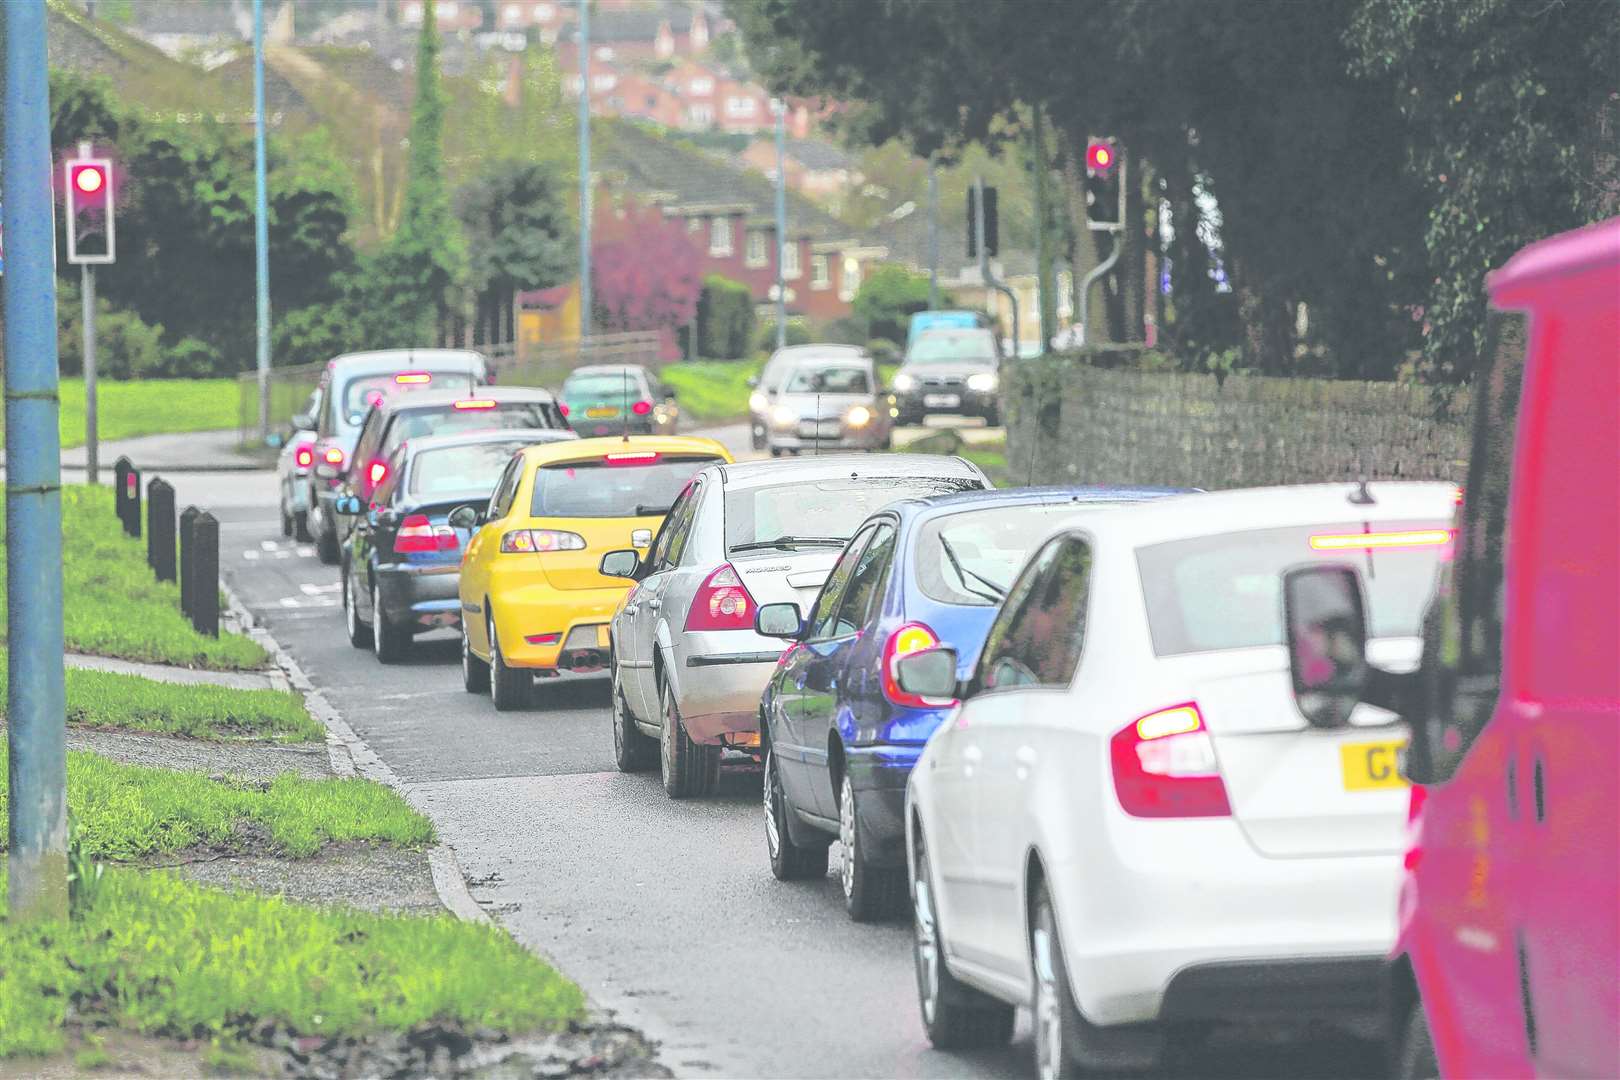 Willington Street: Ready for more cars?